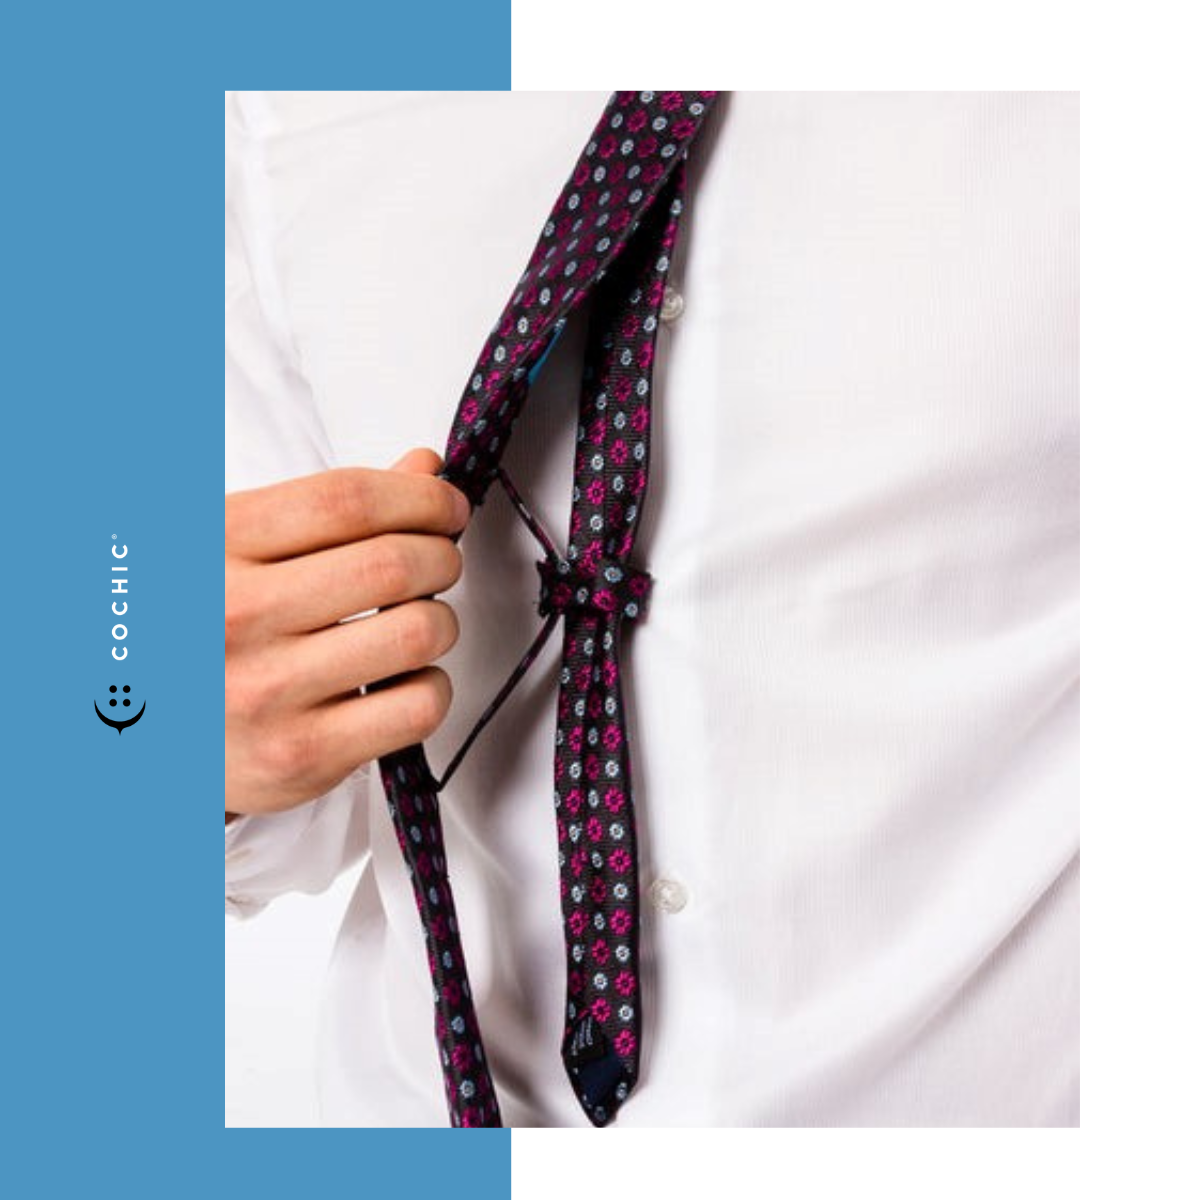 How is our Patented Ties different?